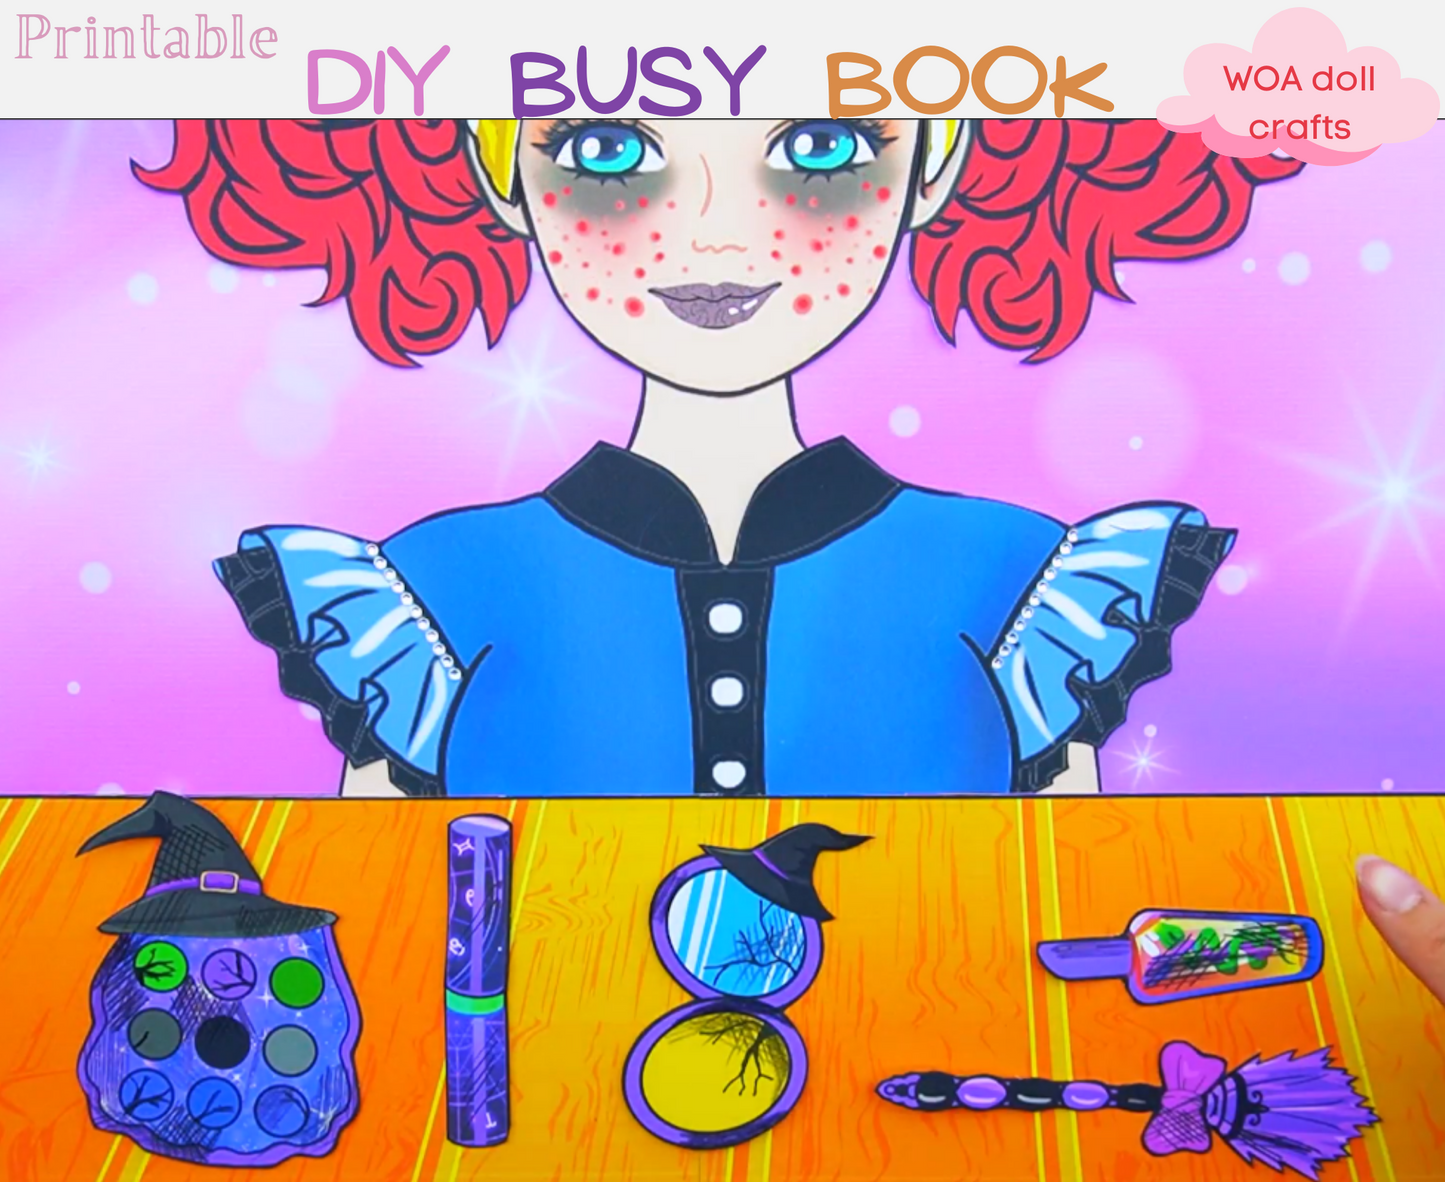 Pretty witch makeup kit printables 🌙 DIY kit for your little one - Paper doll house - Activity book for kids 🌙 Woa Doll Crafts